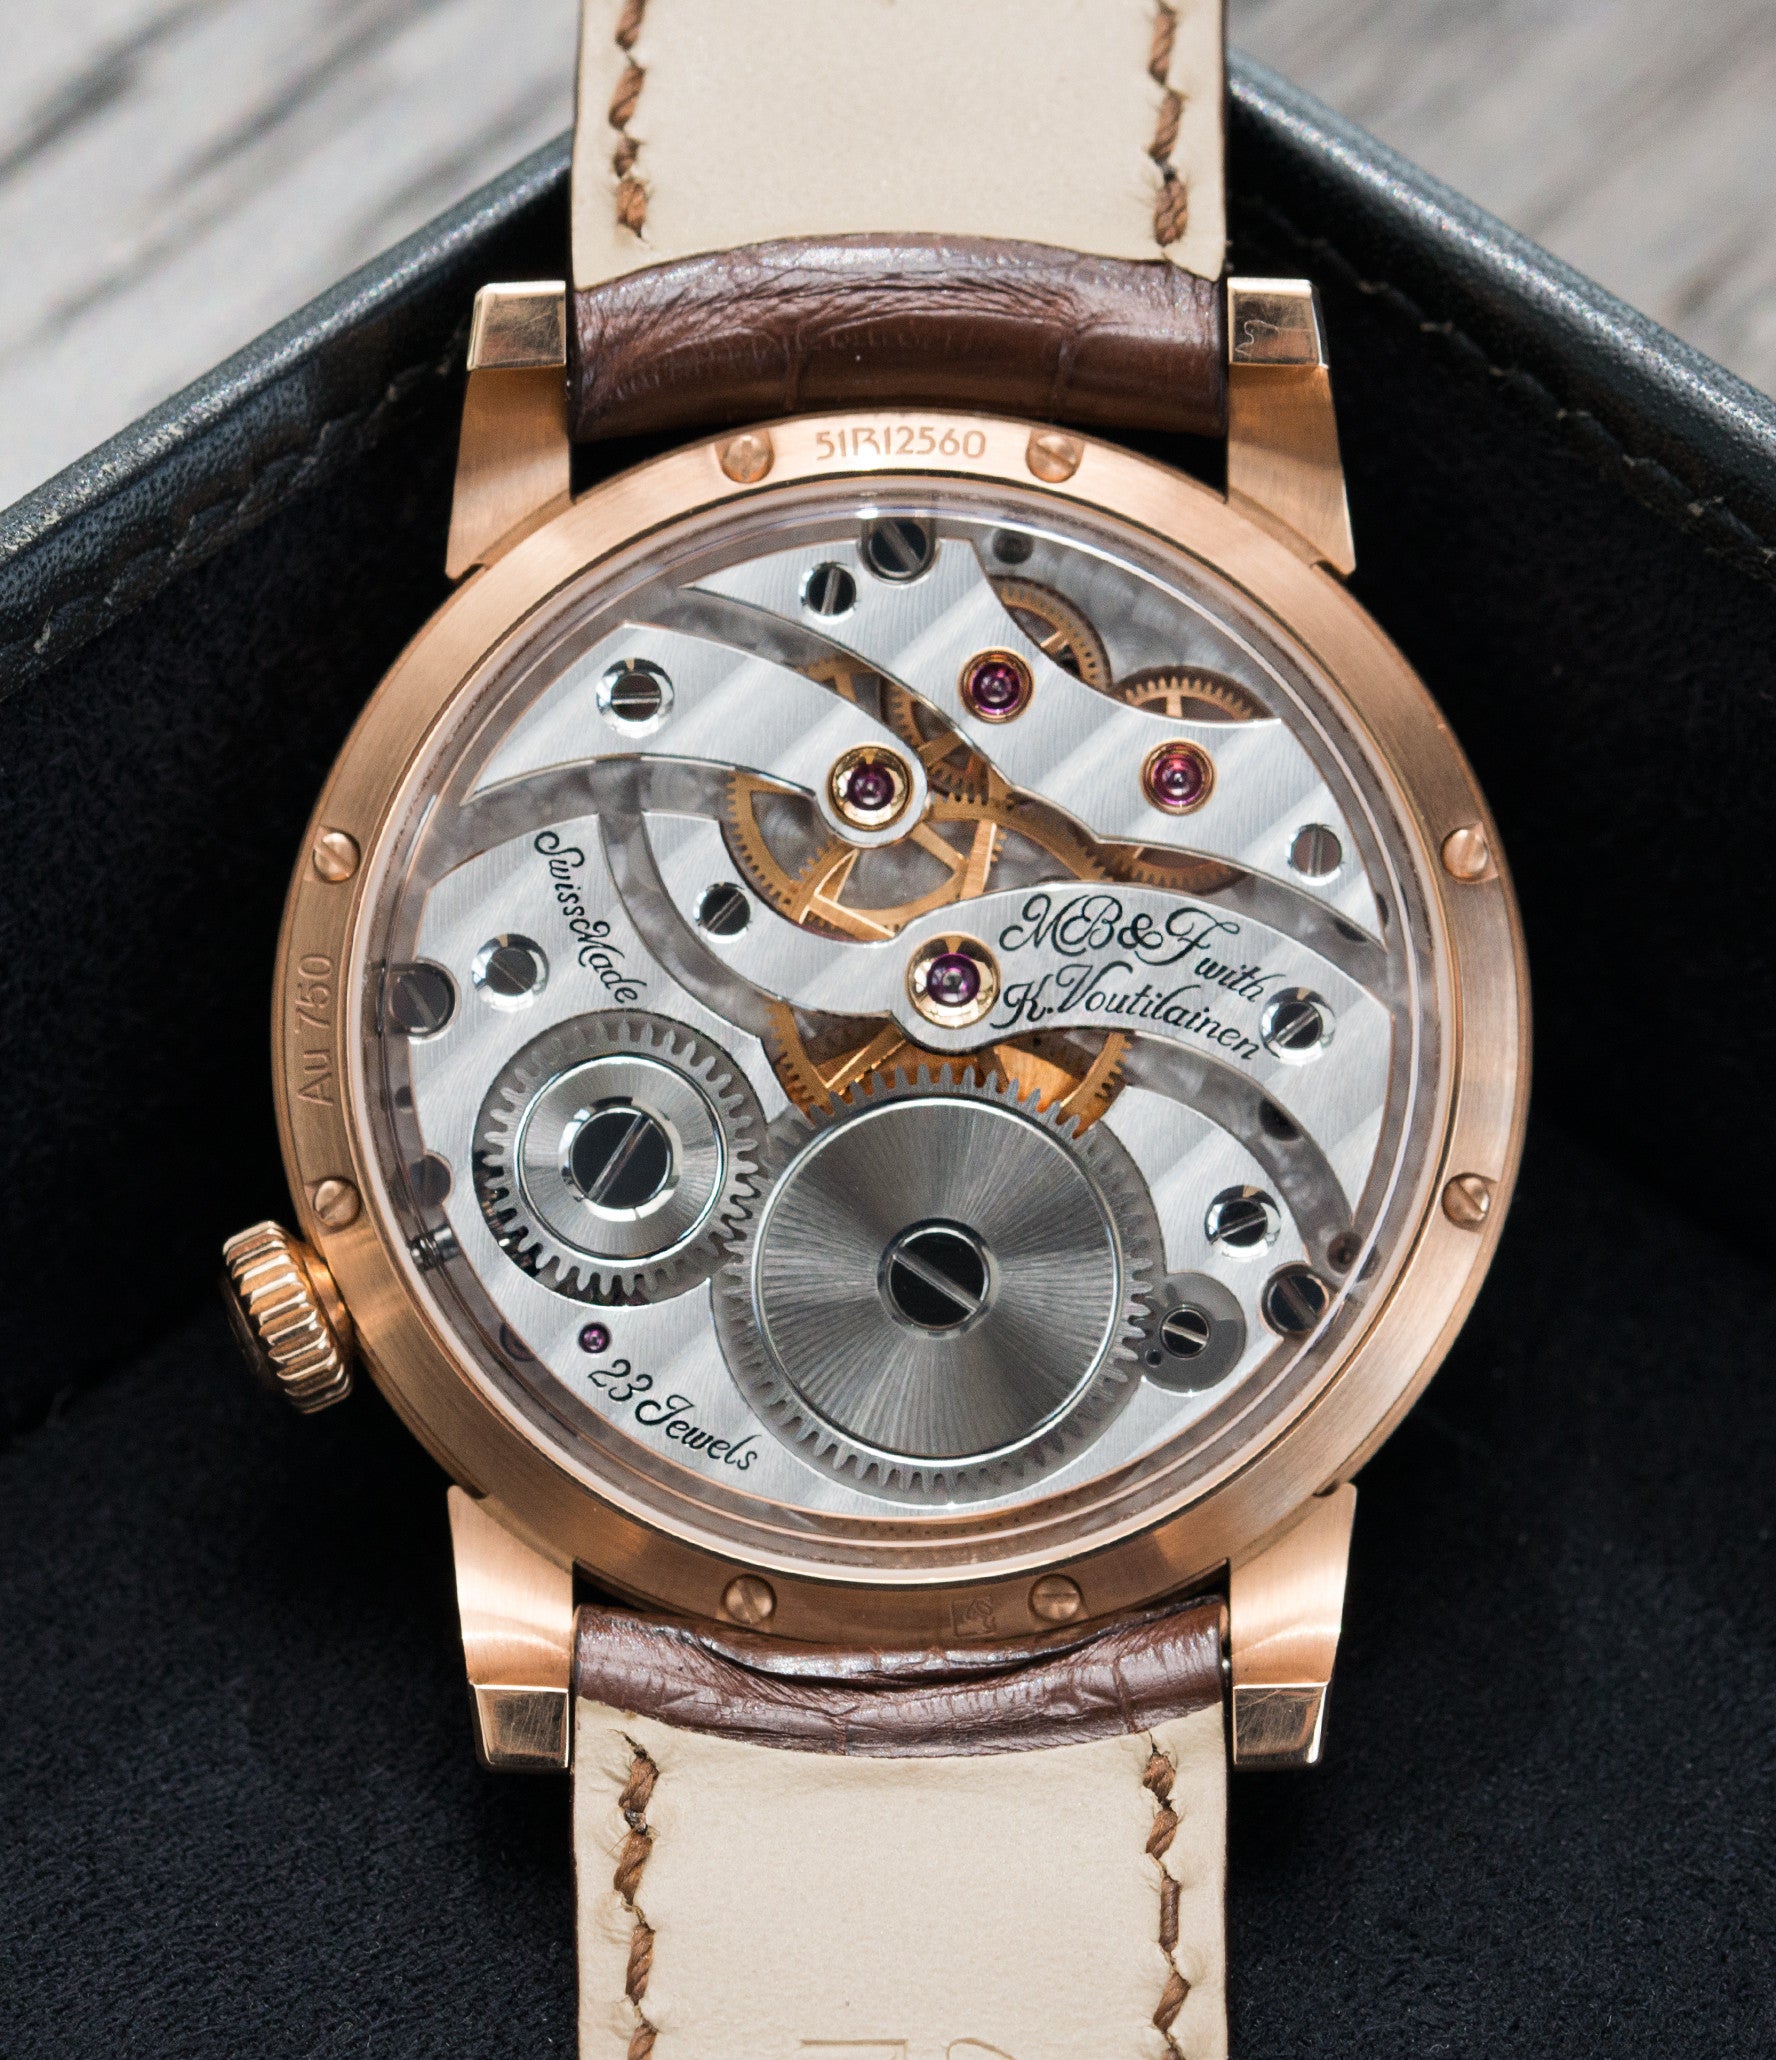 buy MB&F Voutilainen Legacy Machine LM101 rose gold preowned luxury dress watch for sale online at a Collected Man London approved seller of independent watchmakers
